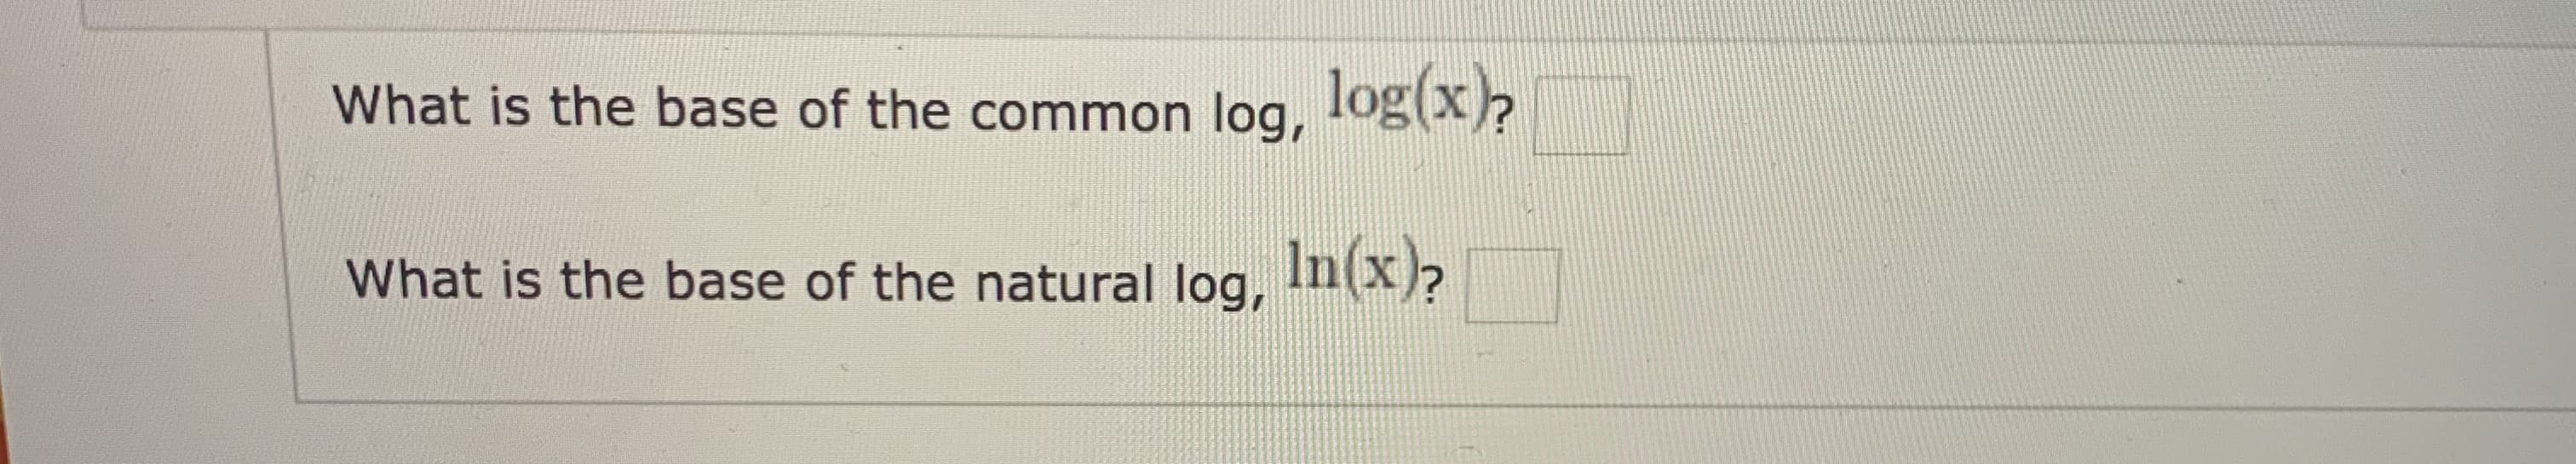 What is the base of the common log,
log(x)
What is the base of the natural log,
In(x)?
